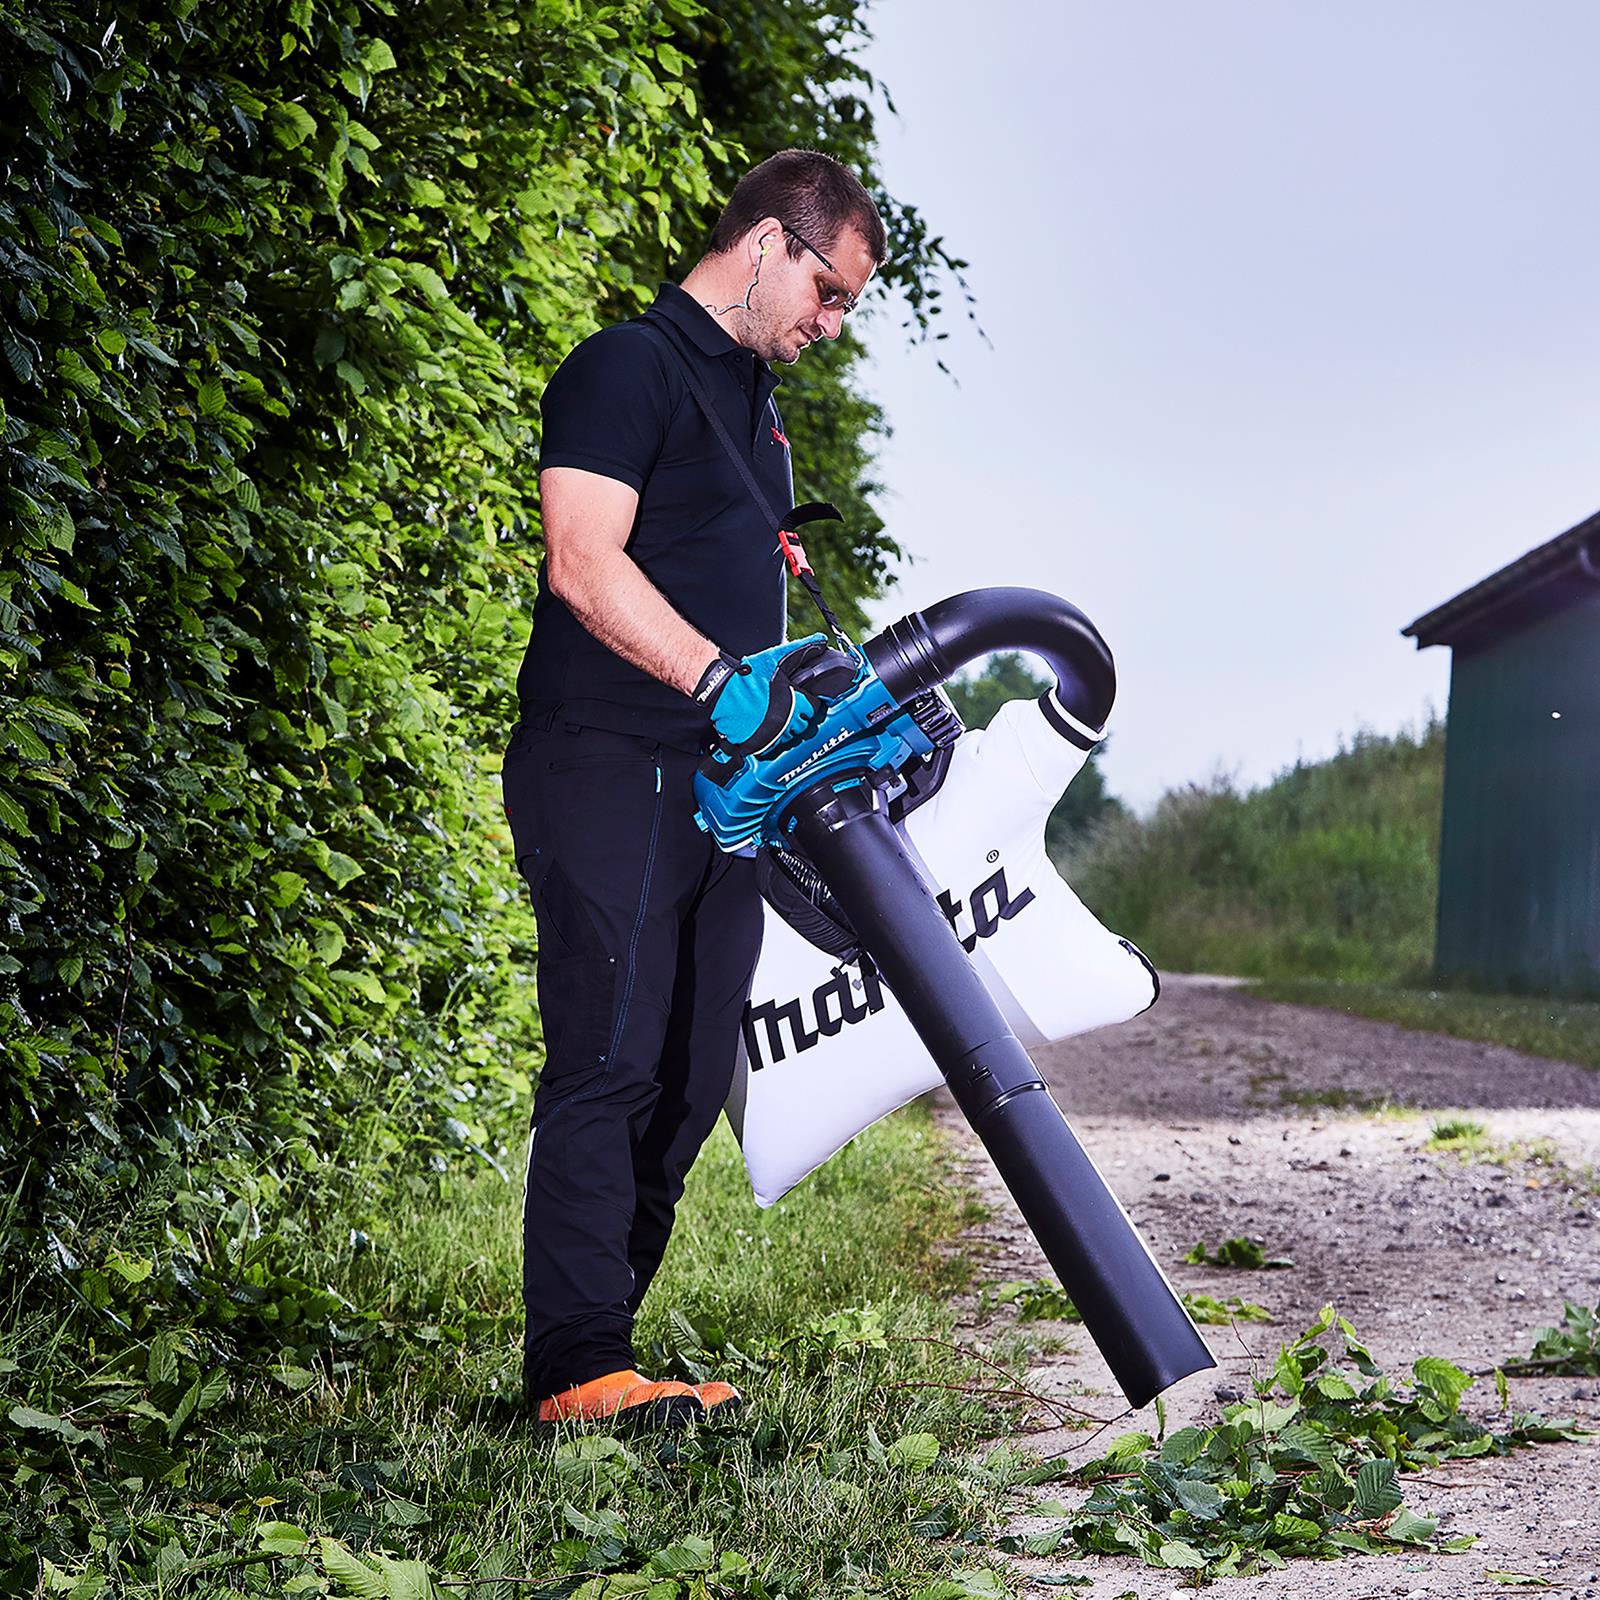 Makita Leaf Blower Vacuum Kit 18V x 2 LXT Brushless Cordless 2 x 6Ah Battery and Dual Rapid Charger 14.4N Garden Grass Clippings Construction DUB363PG2V